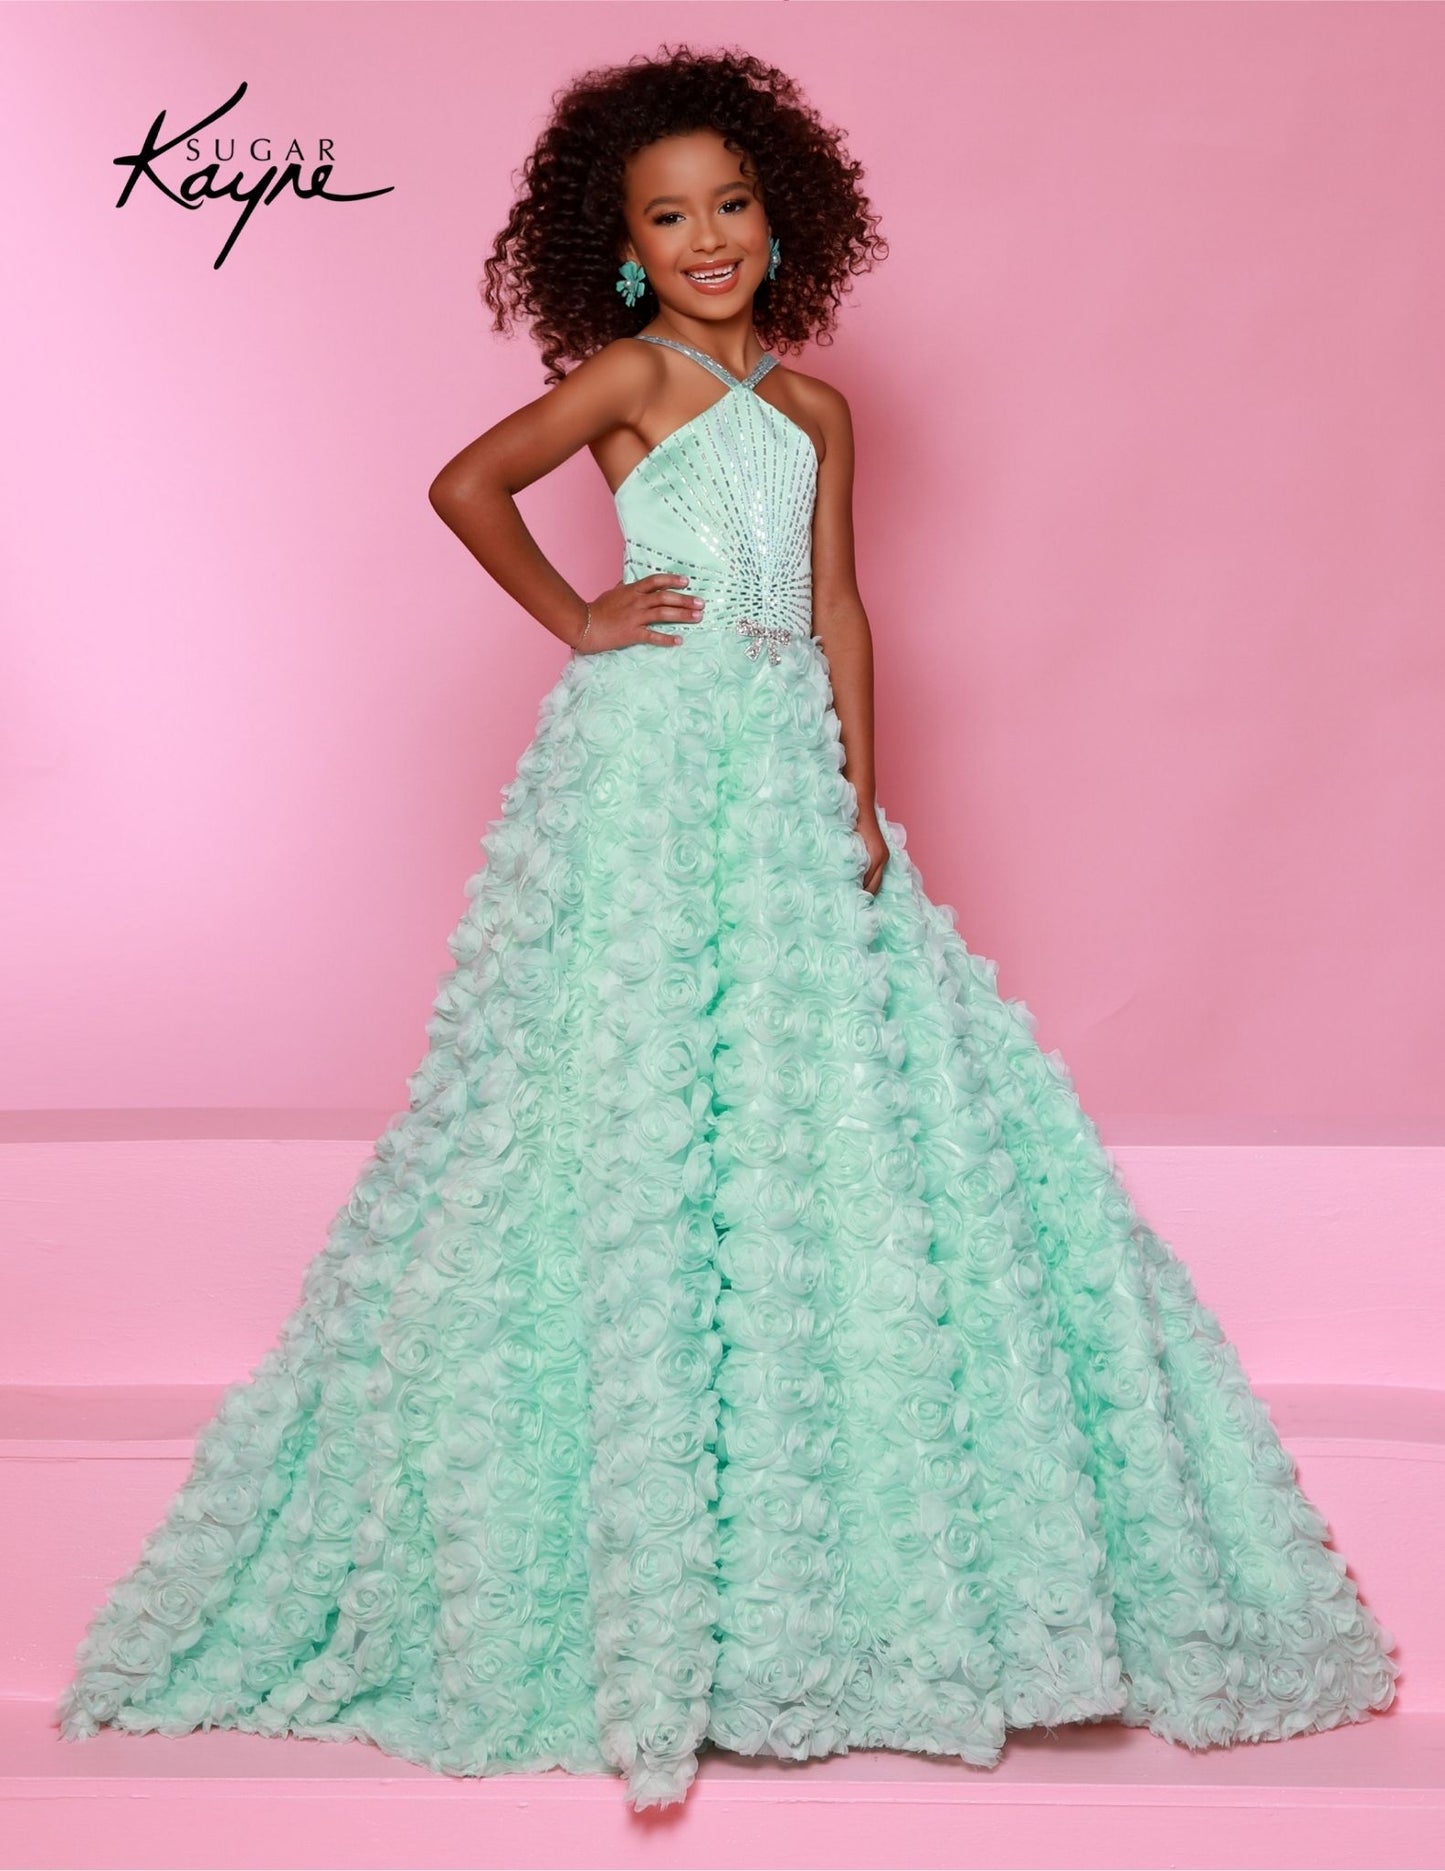 This Sugar Kayne C351 dress will make any girl feel like a princess. It features a delicate 3D rose mesh ballgown with a halter neckline and an A-line silhouette, perfect for preteen pageants. The fine detailing and quality materials ensure that this dress will turn heads and make your girl feel special. Petals of perfection – our 3D Rose Mesh Ballgown featuring a halter neckline is designed to make you shine on stage with elegance and grace!